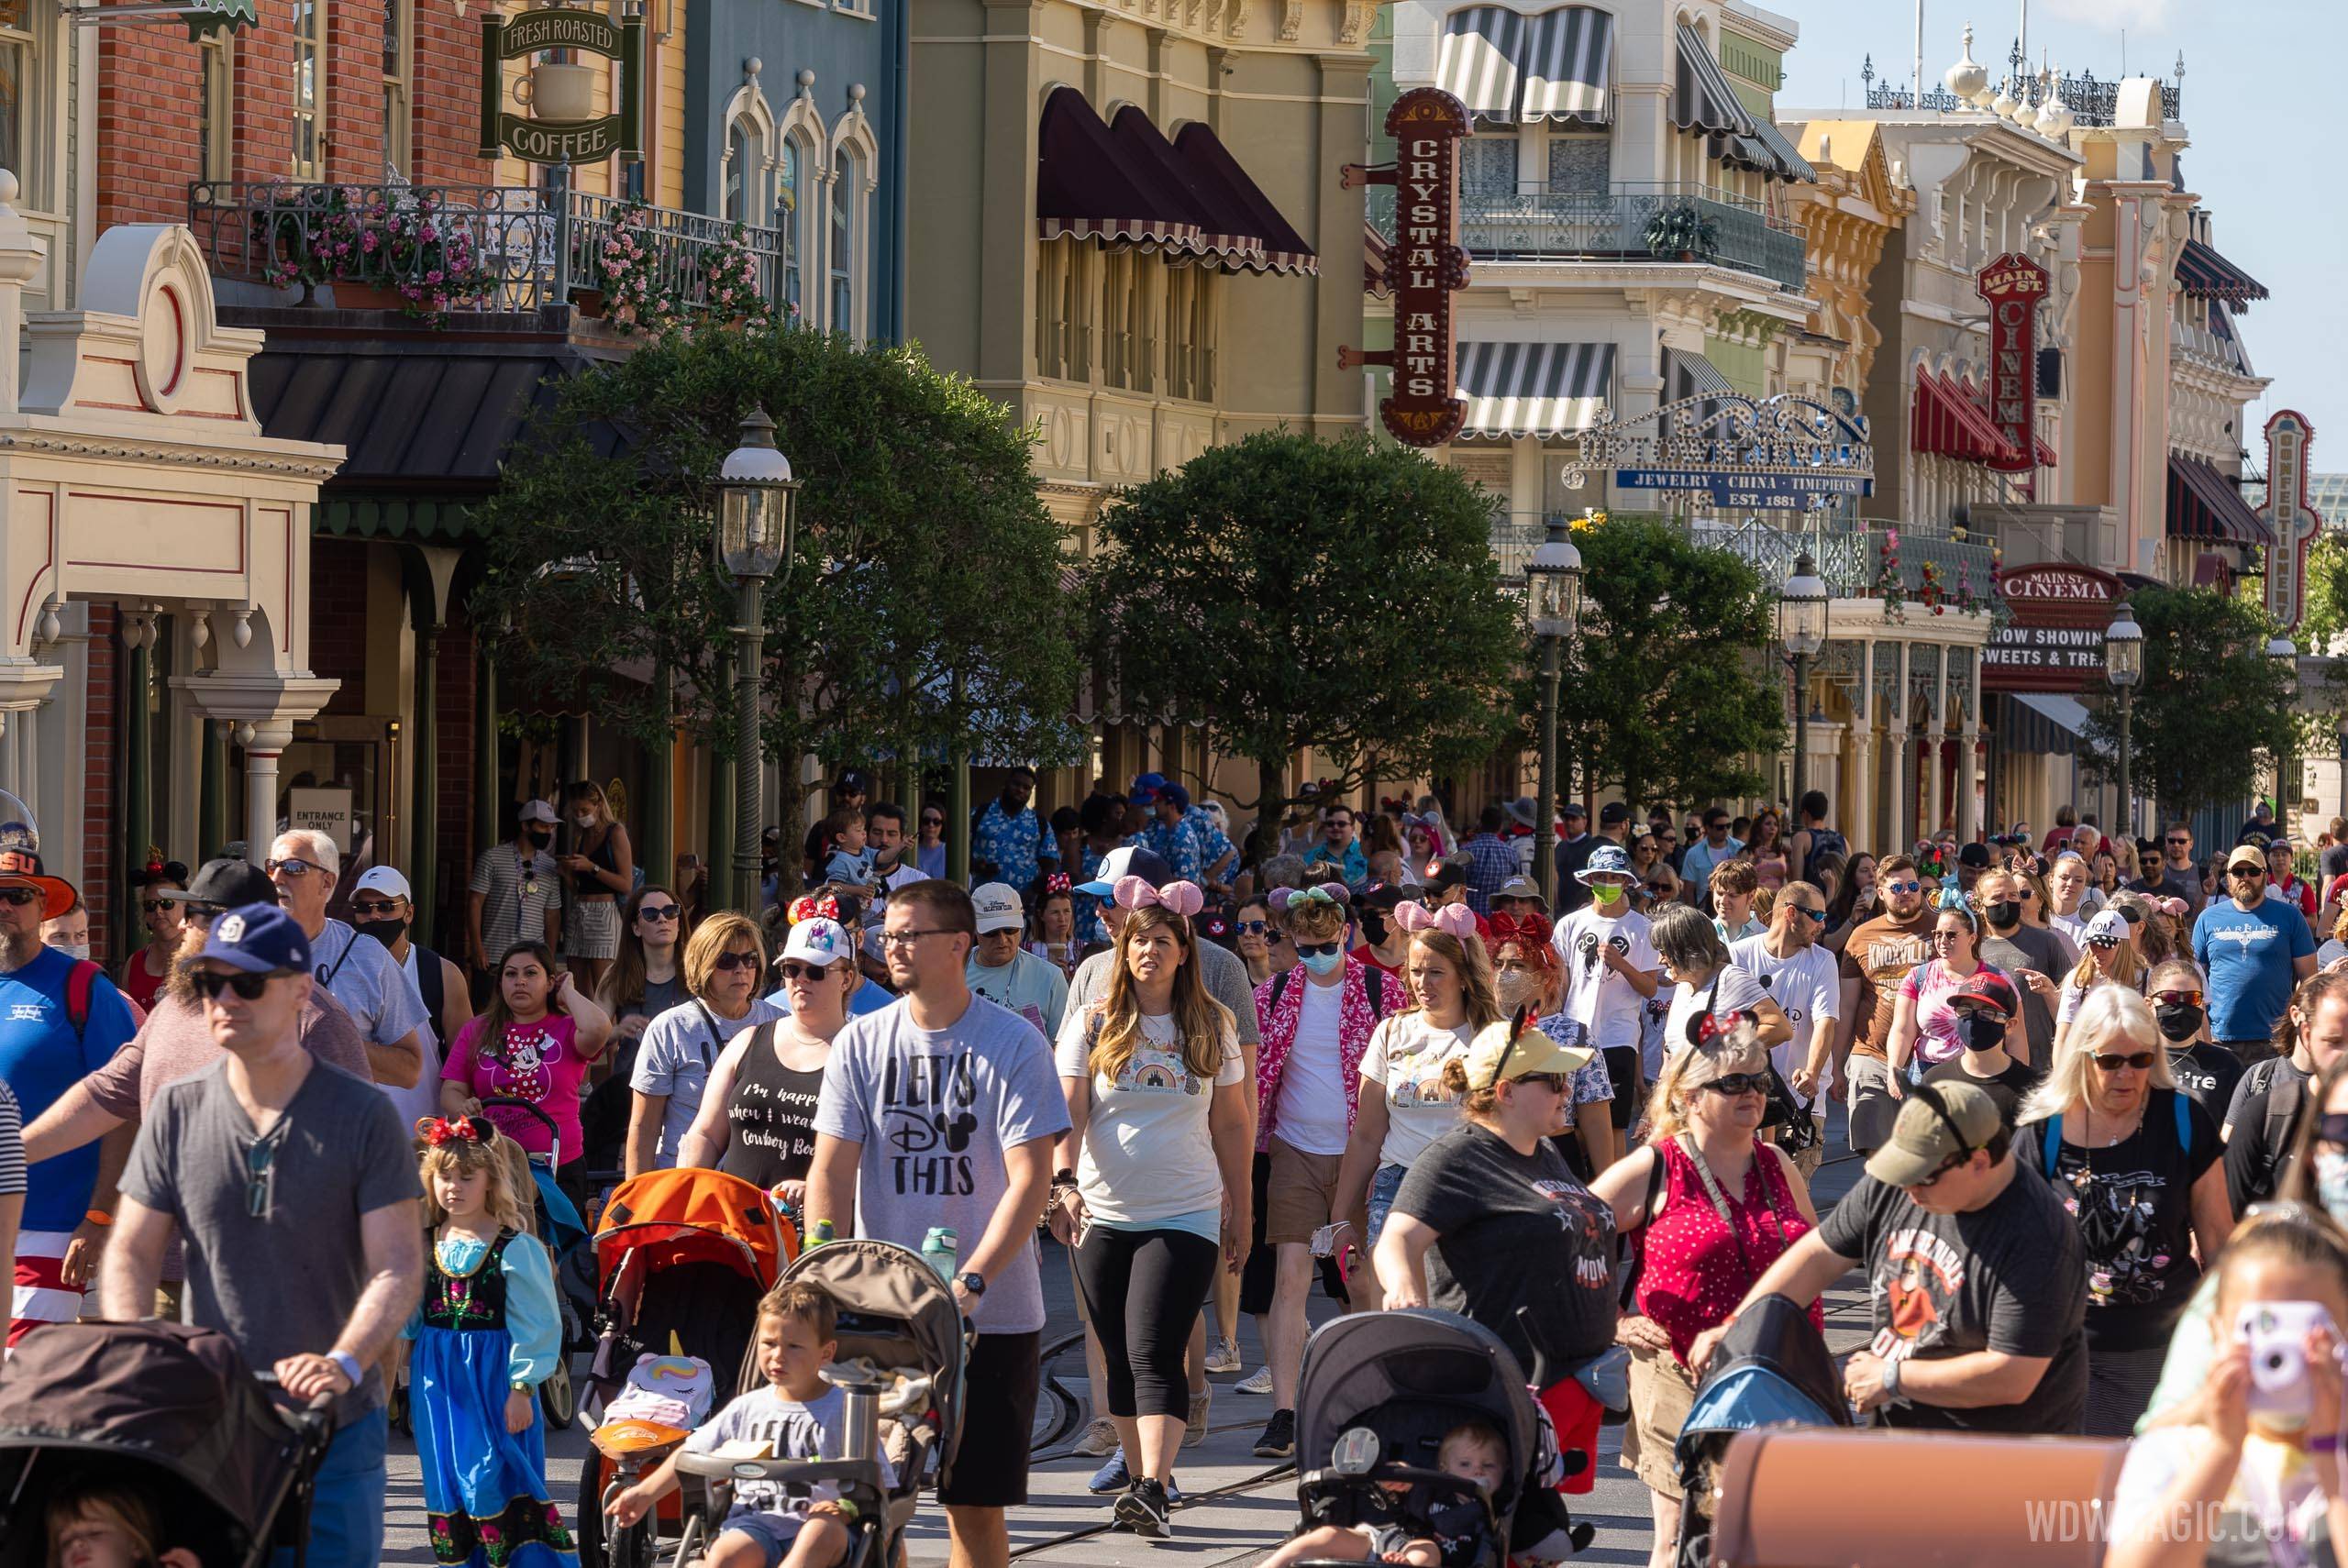 Guests walking along Main Street U.S.A. with the optional masks rules in place on May 15